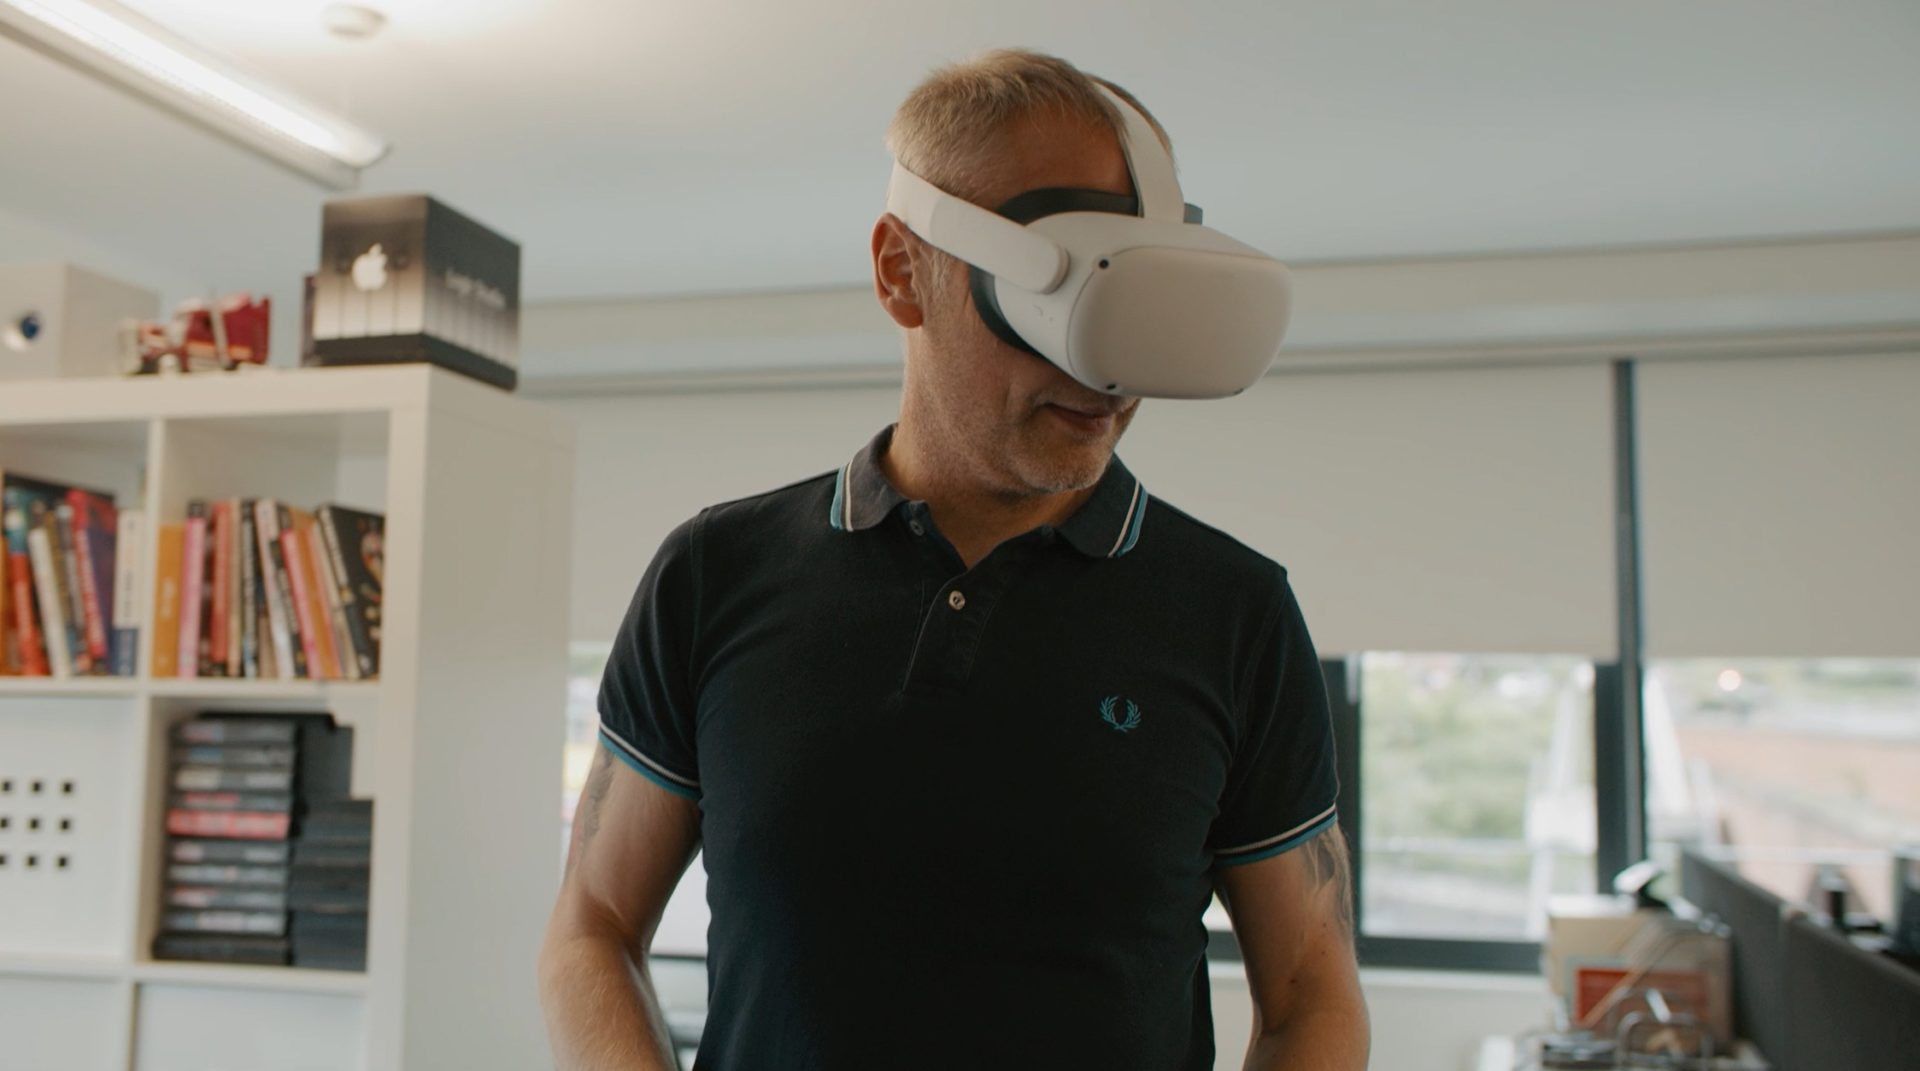 Benefits of Virtual Reality in the Workplace